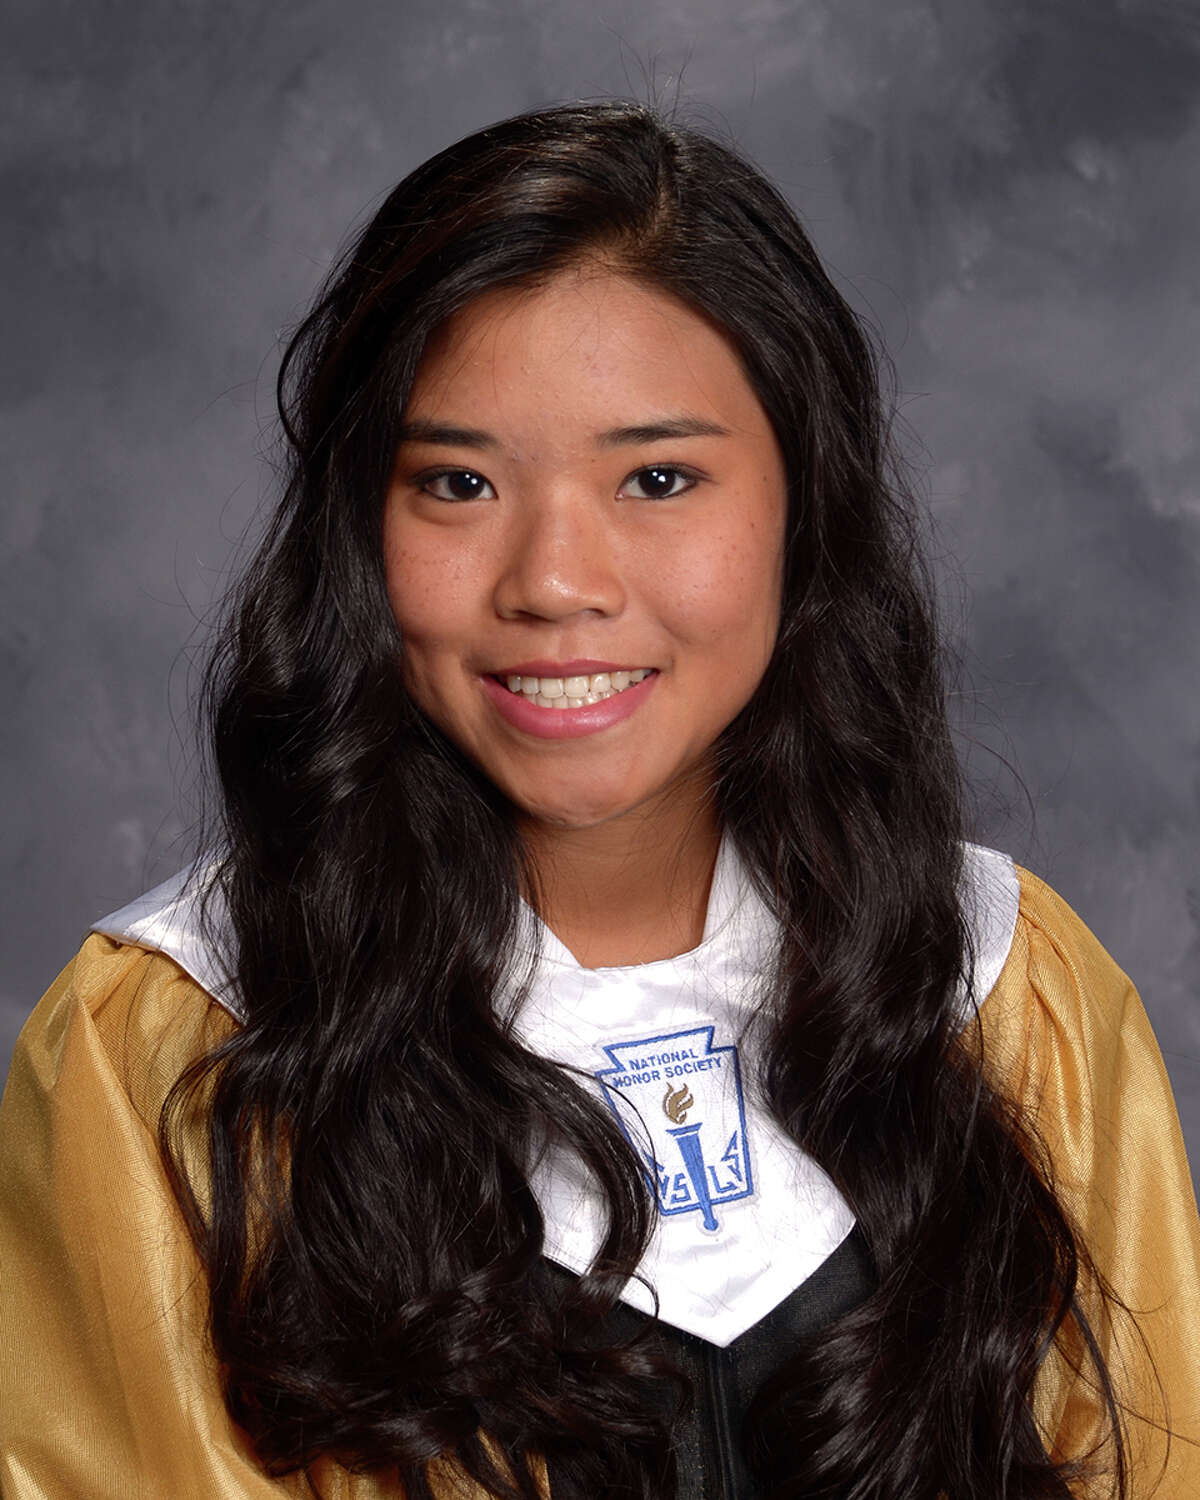 Andrea Nguyen is the Valedictorian for the Class of 2017 at Foster High School.